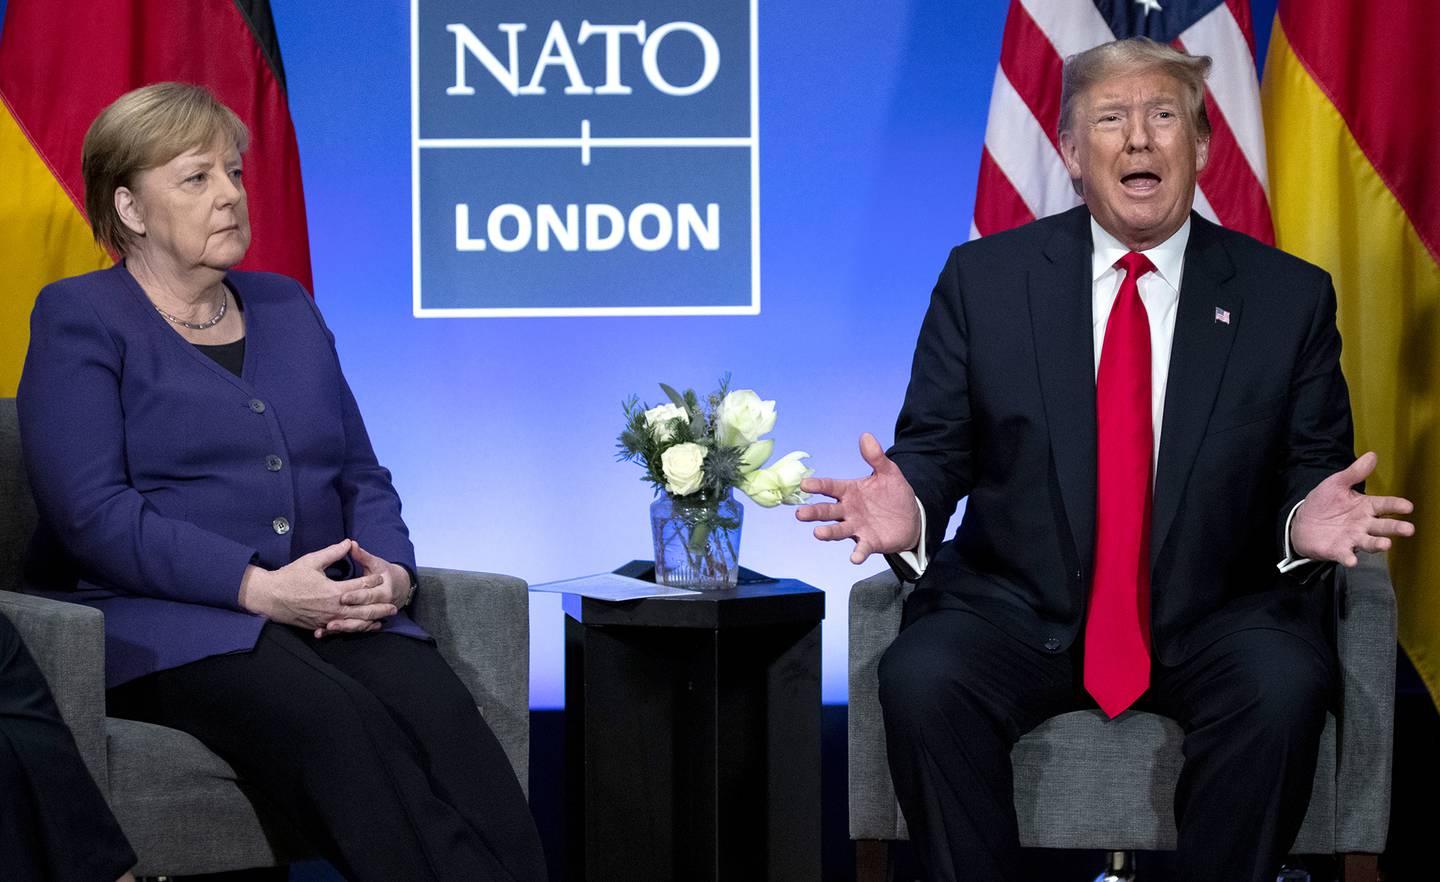 In this Dec. 4, 2019, file photo President Donald Trump meets with German Chancellor Angela Merkel during the NATO summit at The Grove in Watford, England